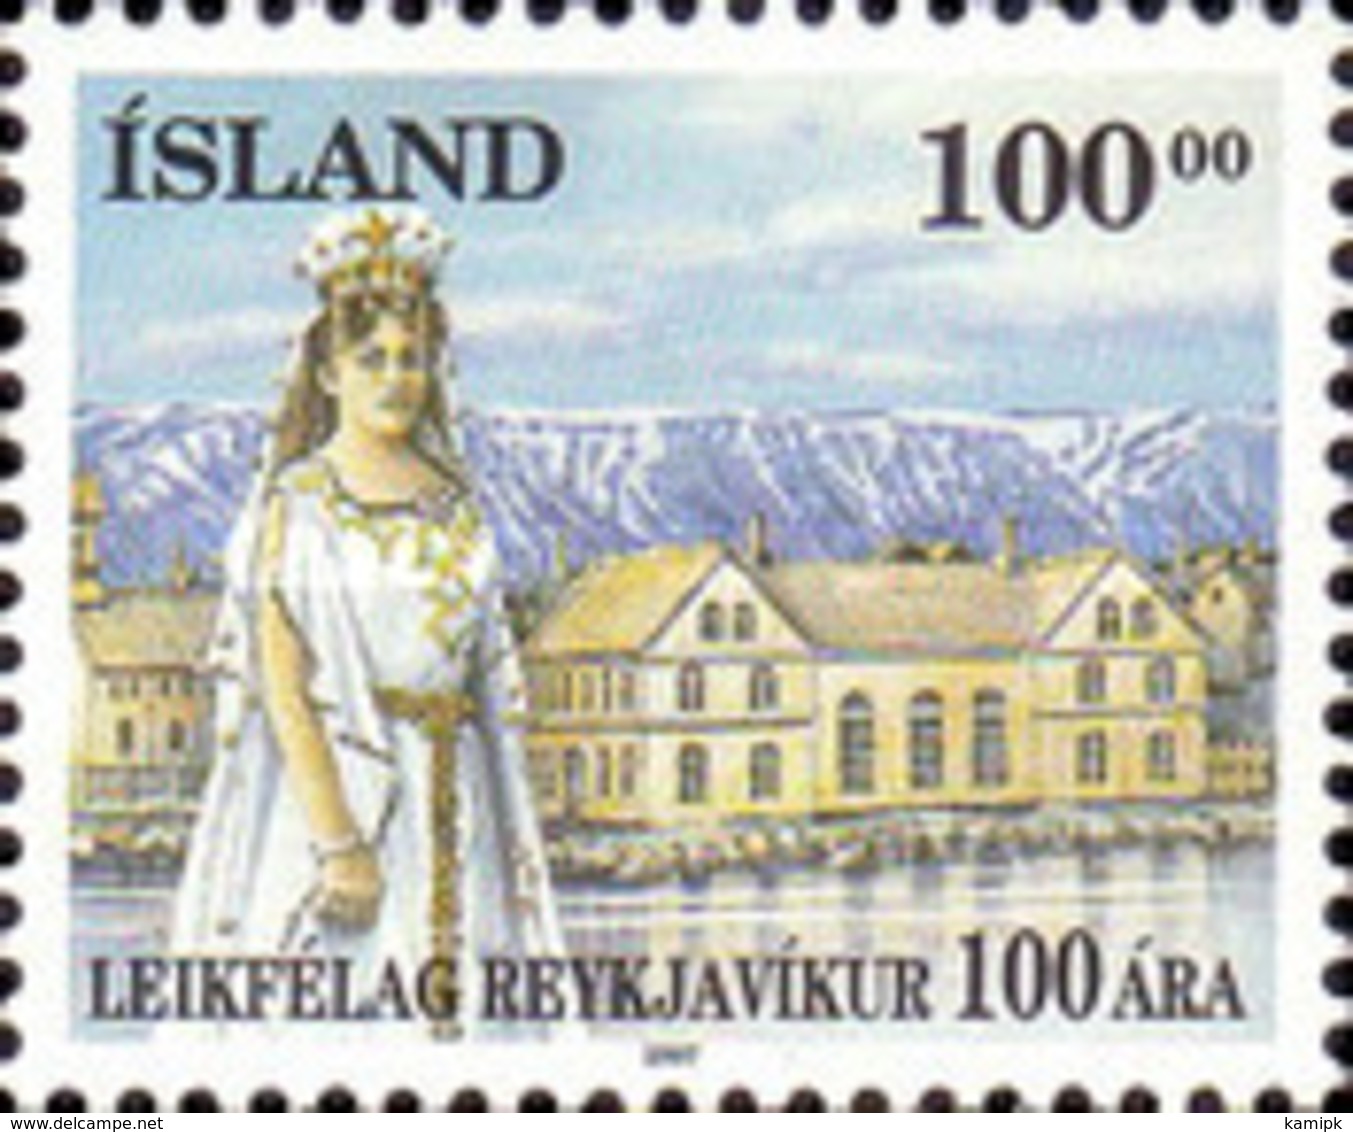 USED STAMPS  Iceland - The 100th Anniversary Of The Reykjavik T...	 - 1997 - Gebraucht